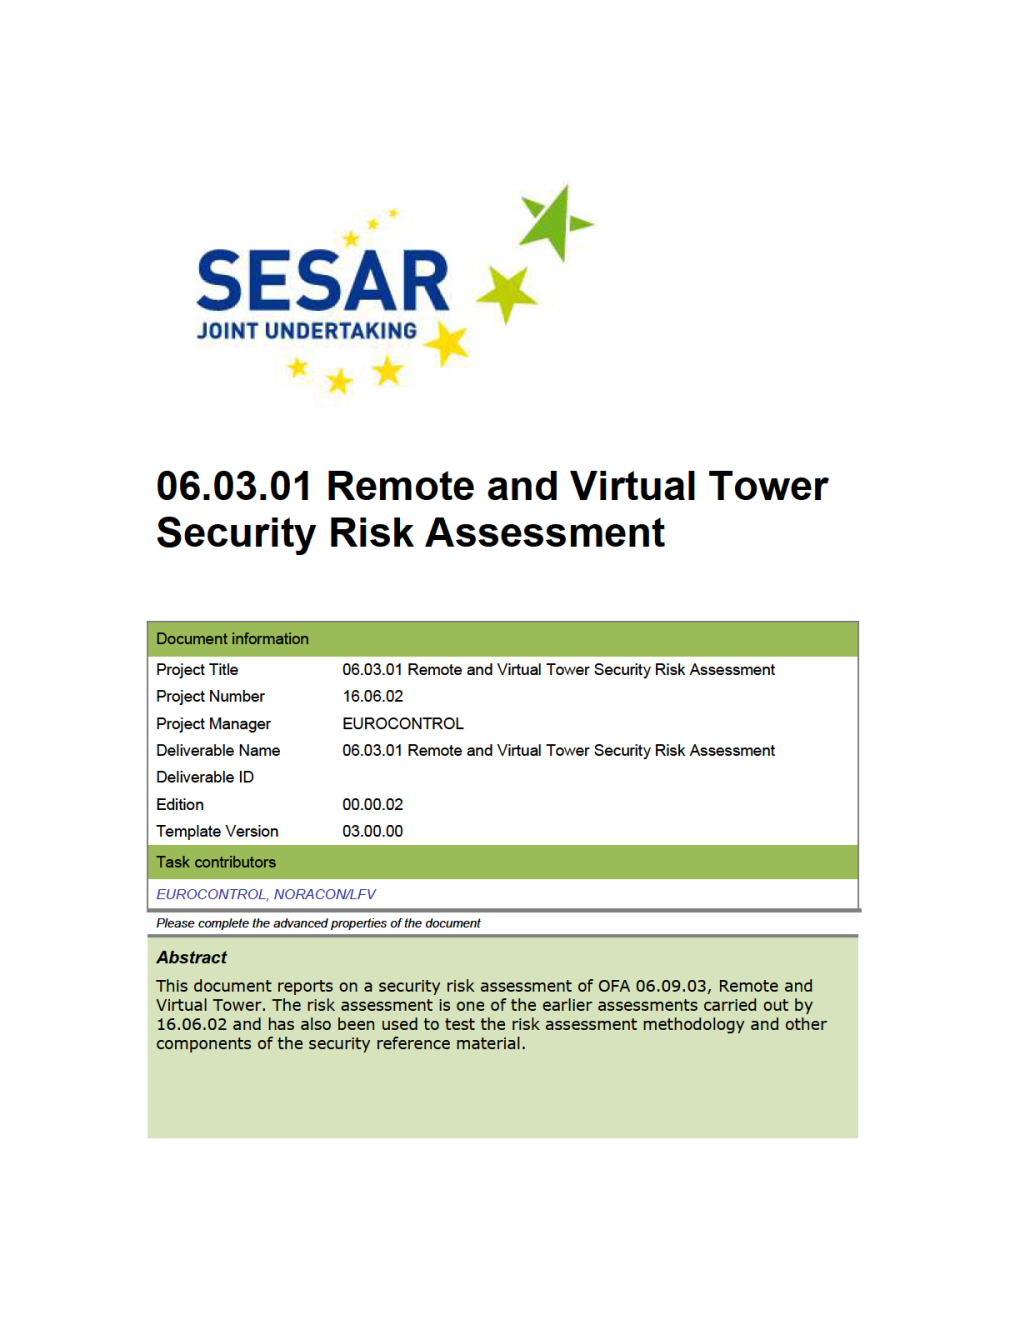 Security Assessment of the Remote Operated Tower OFA 06.03.01